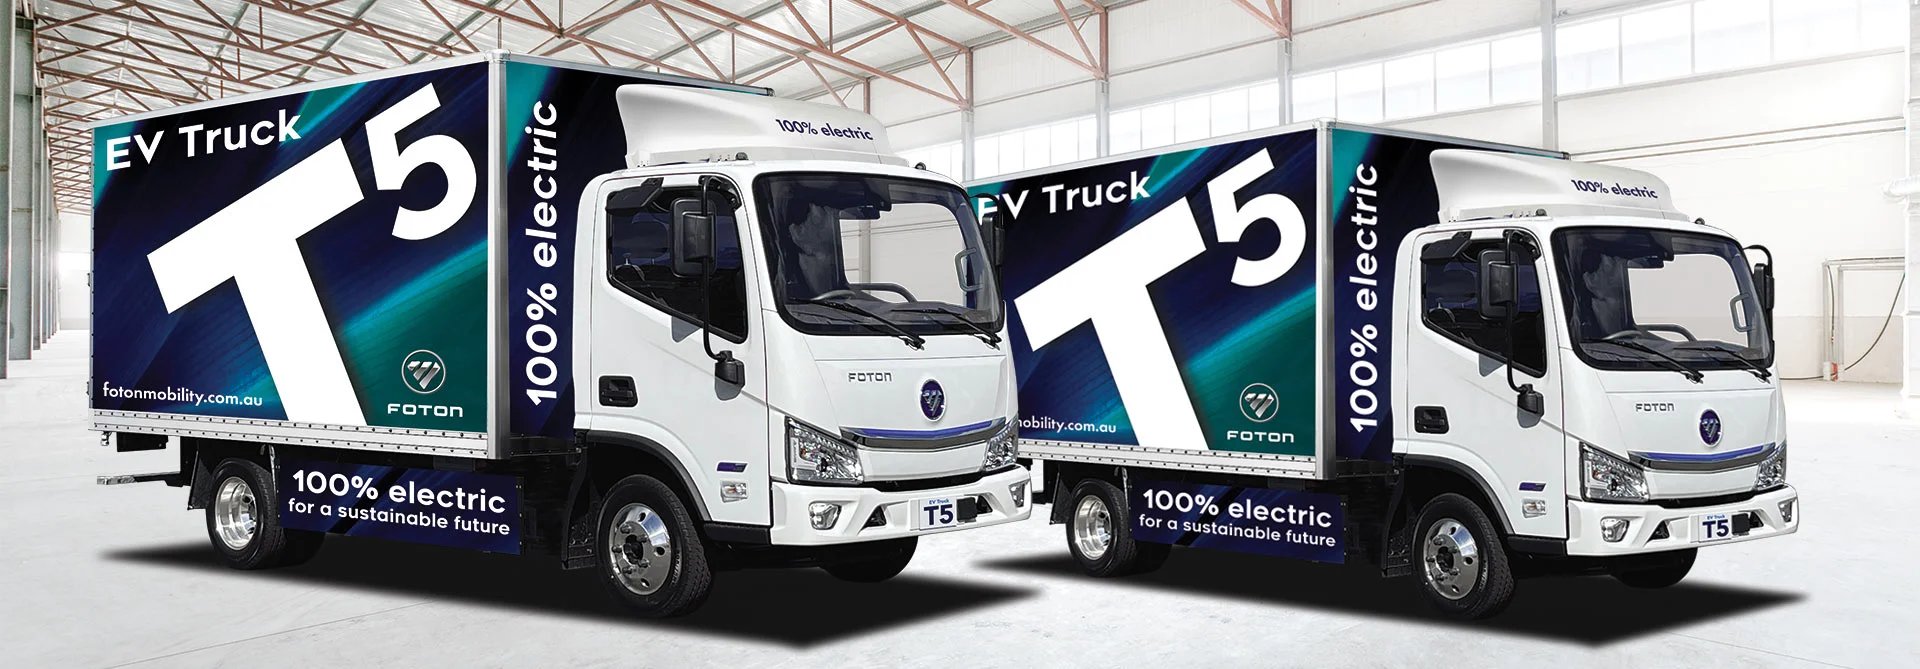 T5 Electric Truck